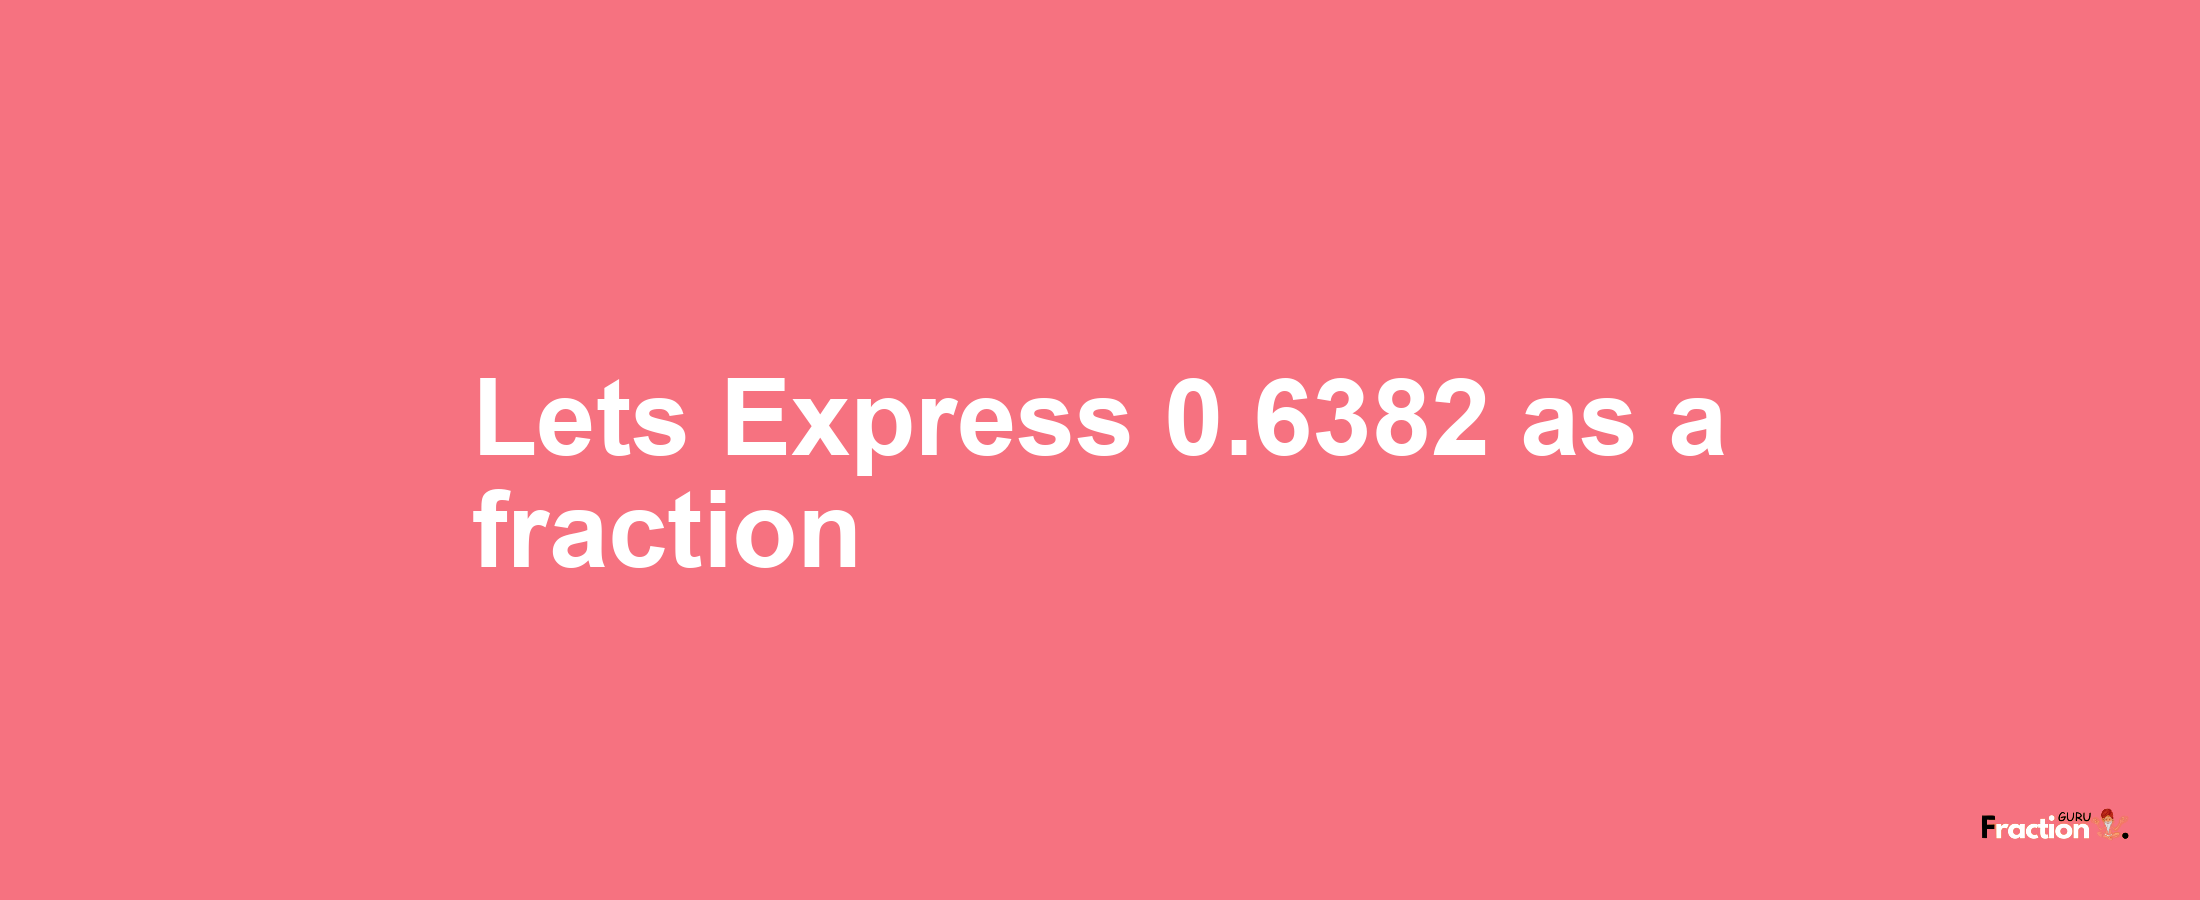 Lets Express 0.6382 as afraction